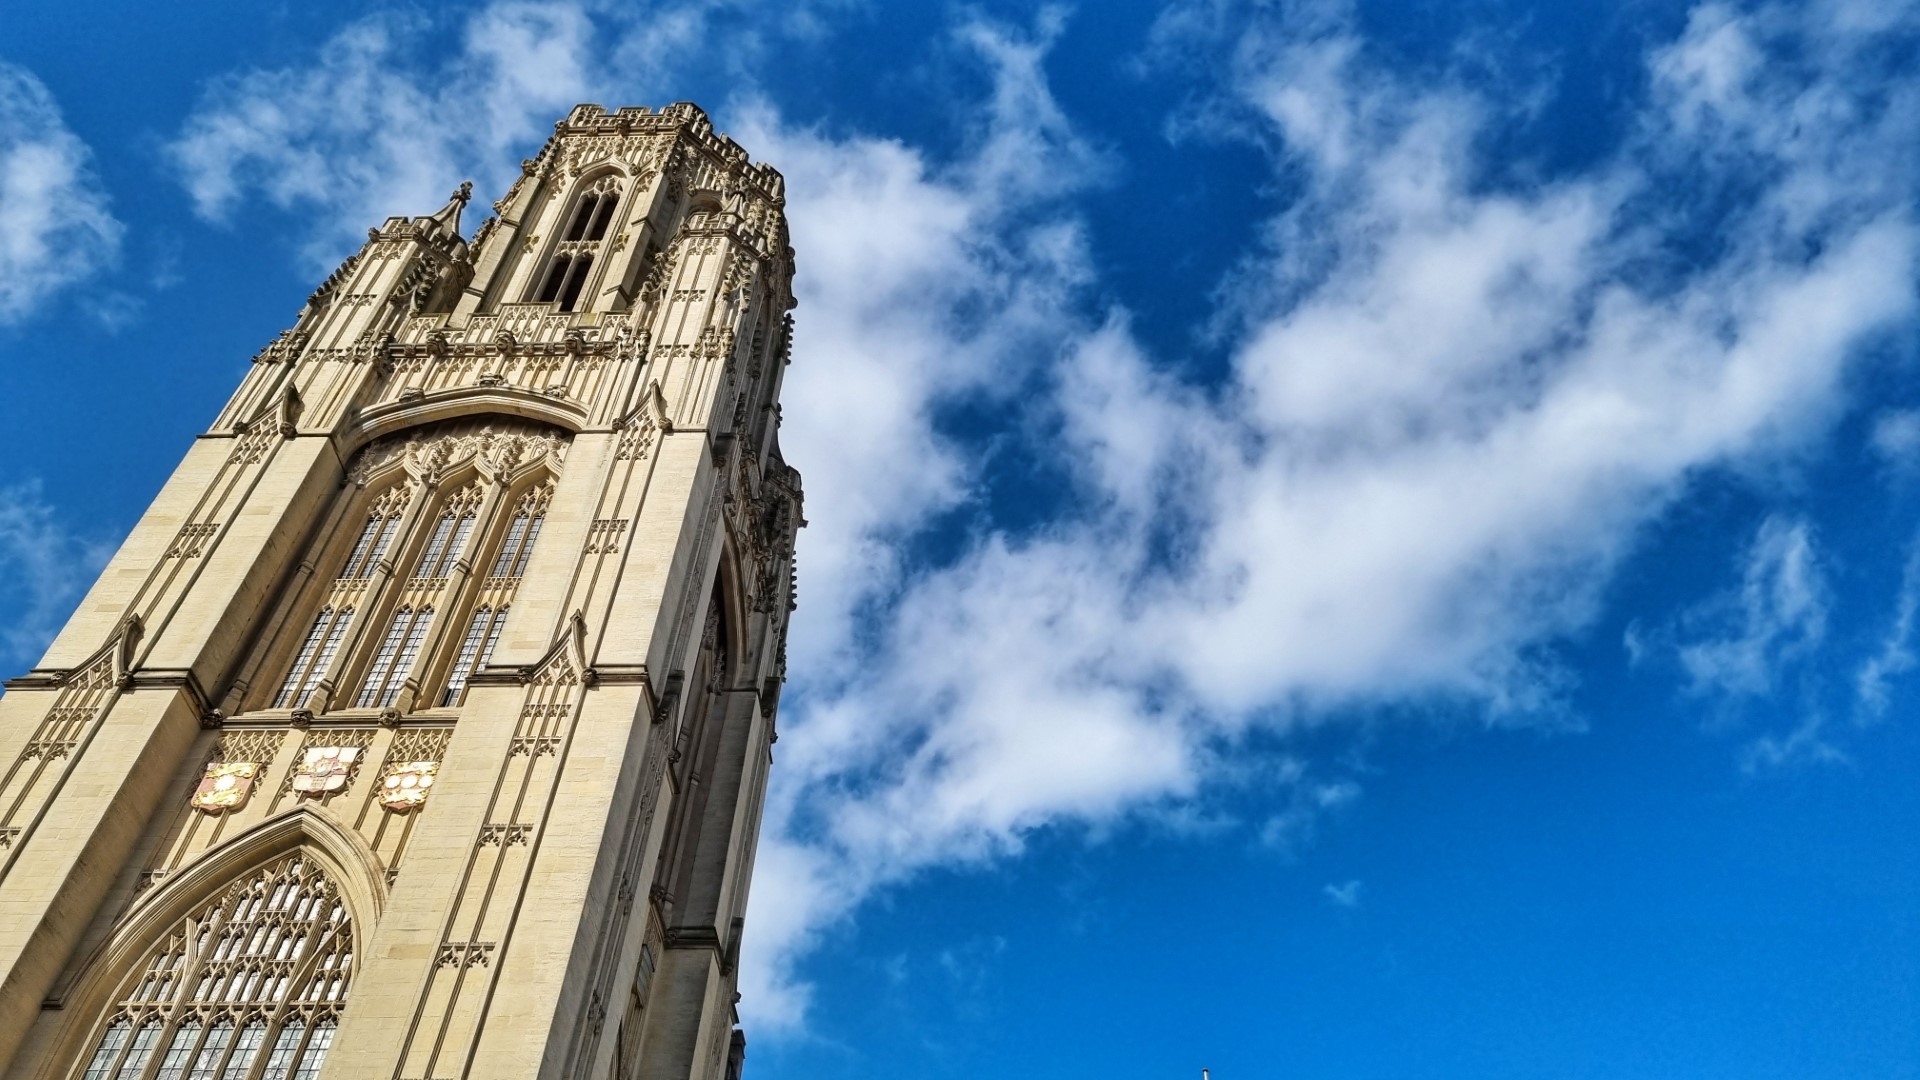 The Wills Memorial Building from below, in front of a blue sky